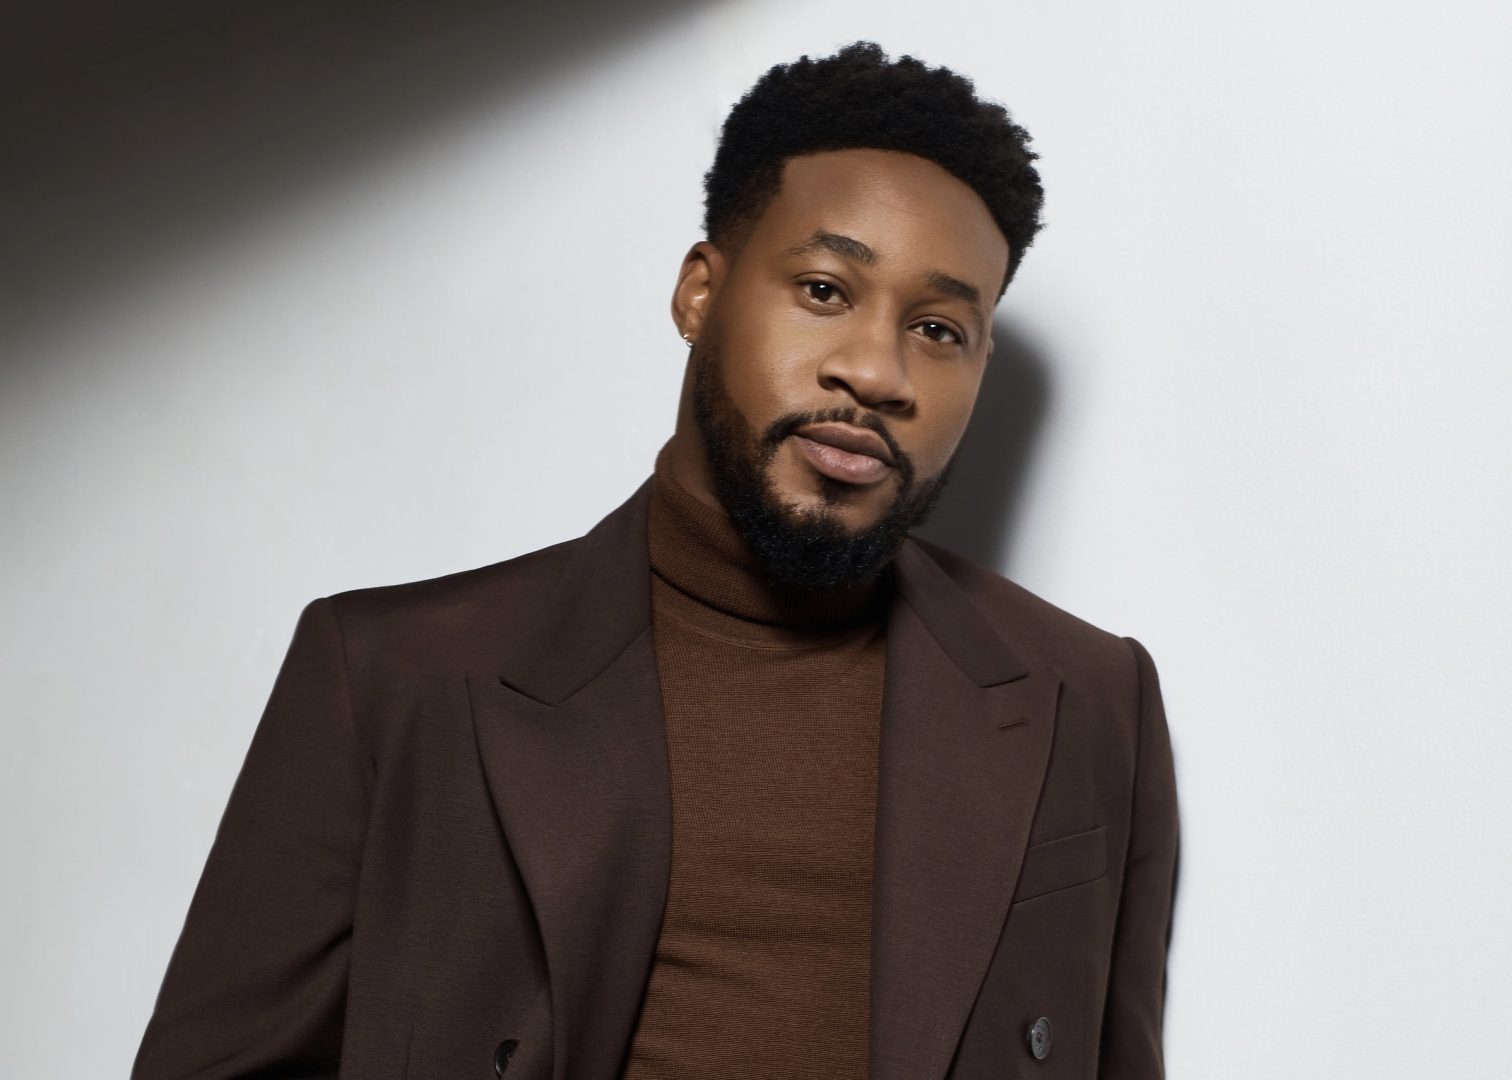 Aaron Jennings stars in NBC hit comedy 'Grand Crew' with all-Black cast